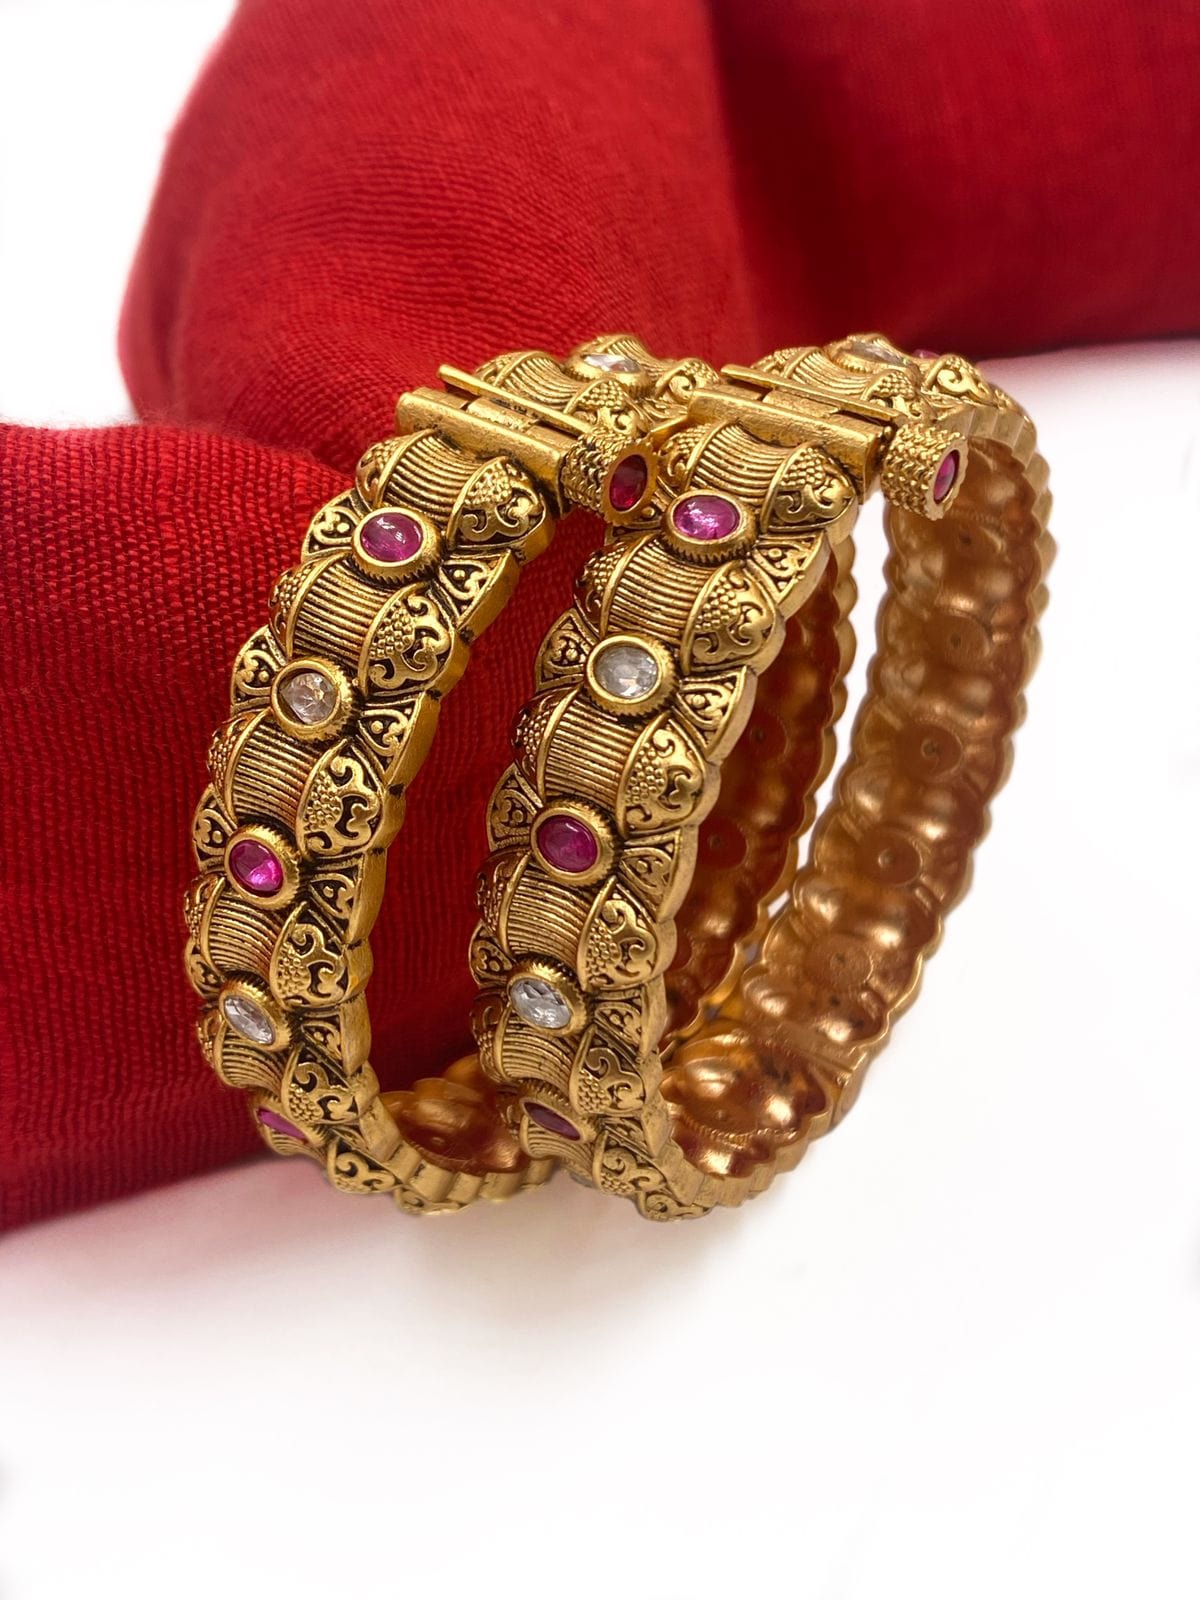 Imitation Artificial Jewellery Manufacturers and Wholesalers in India